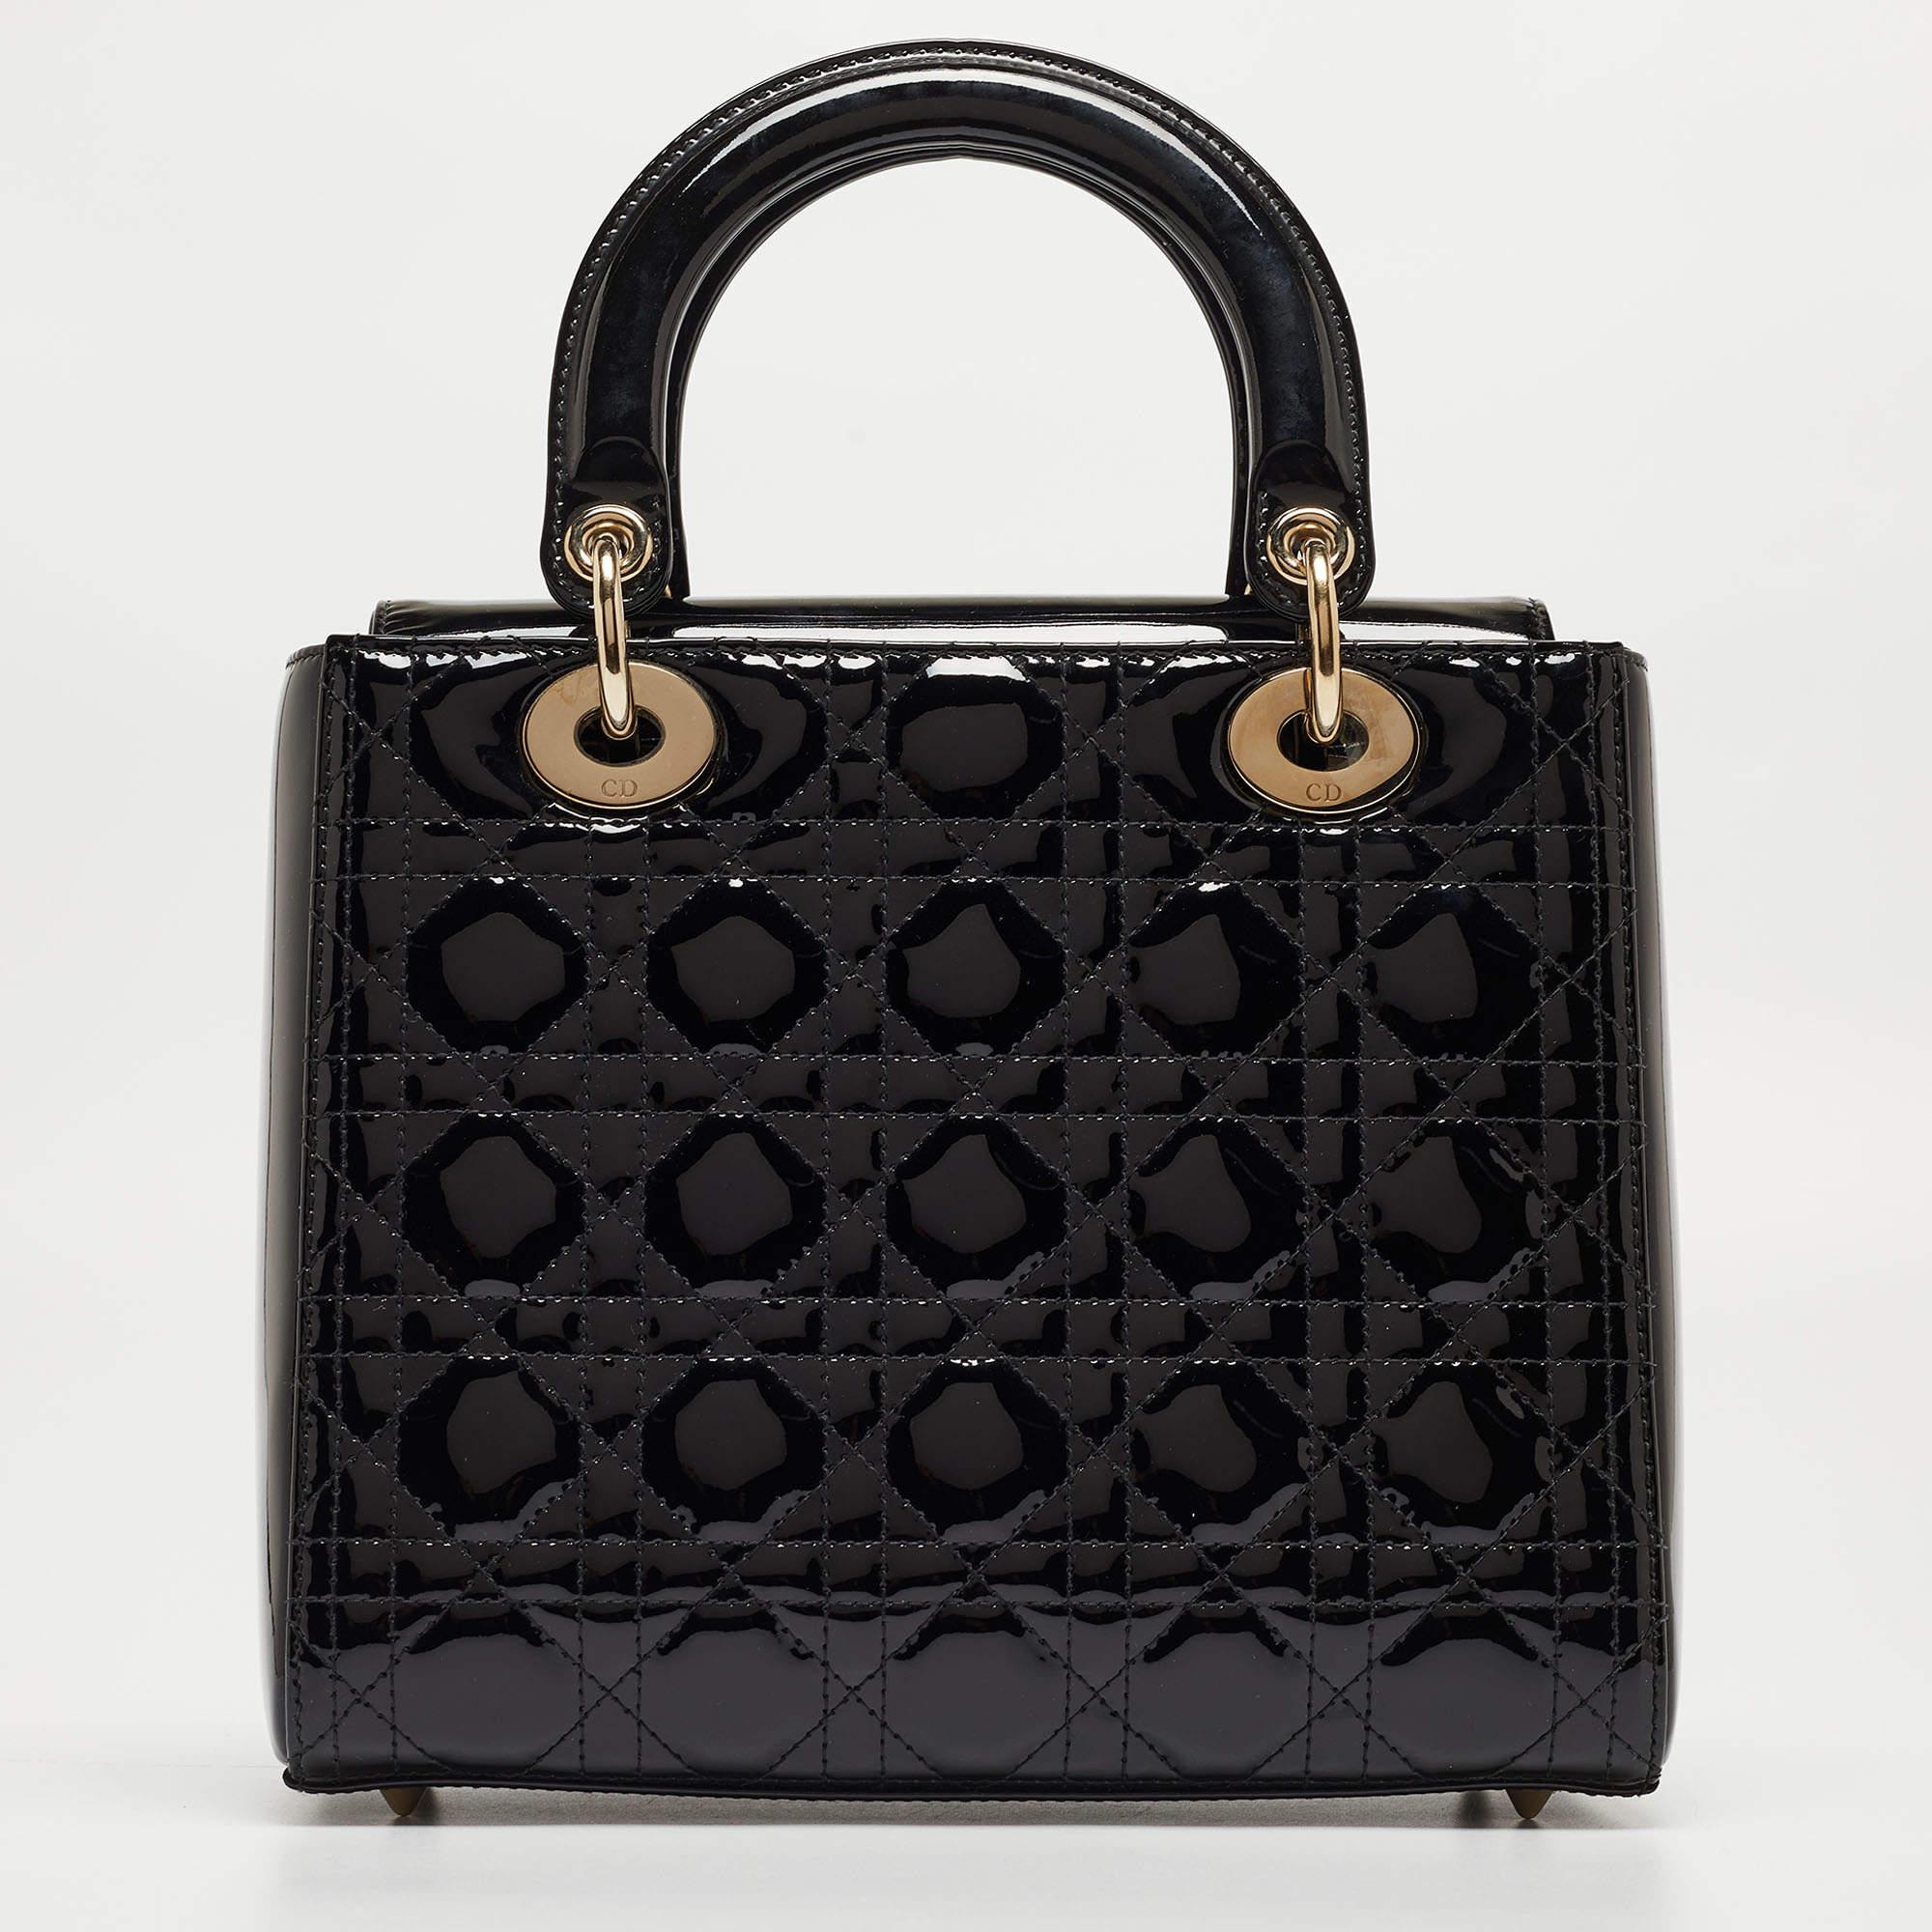 Ensure your day's essentials are in order and your outfit is complete with this Lady Dior bag. Crafted using the best materials, the bag carries the maison's signature of artful craftsmanship and enduring appeal.

Includes: Original Dustbag,